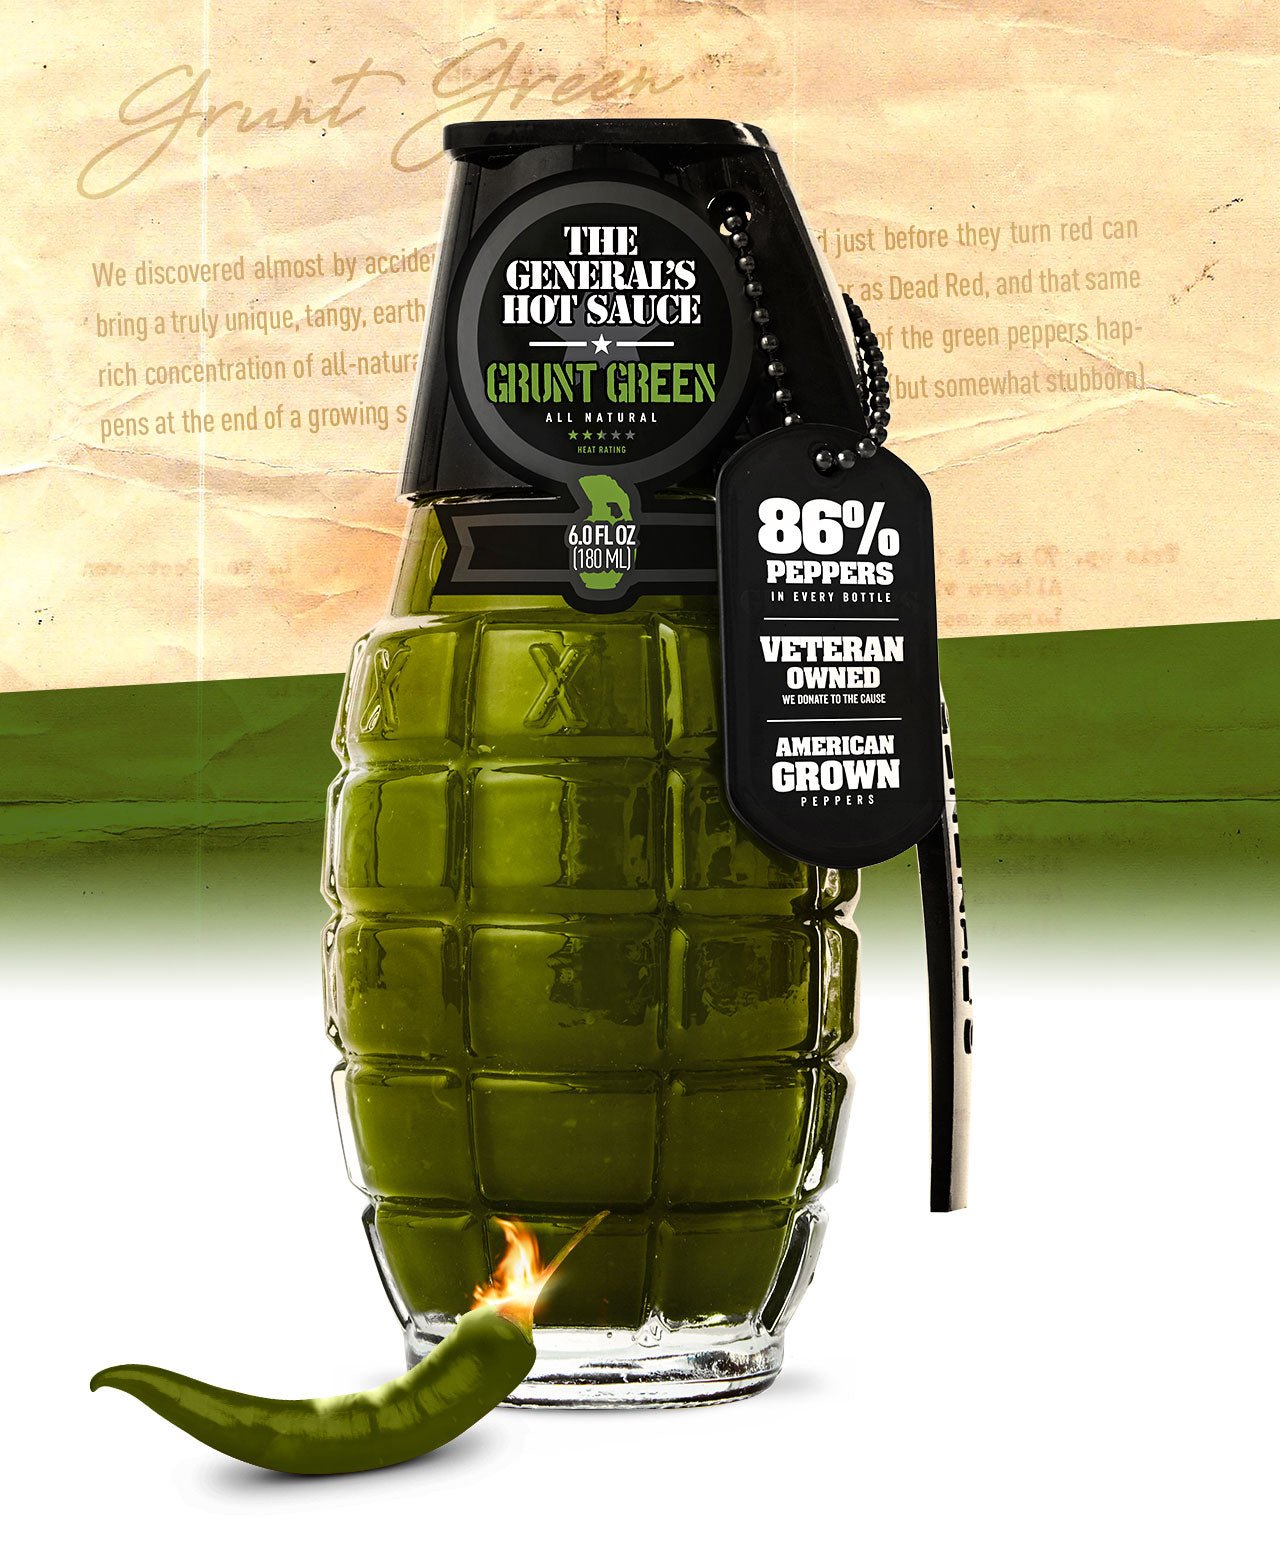 The General's Hot Sauce - Grunt Green - 6 oz.